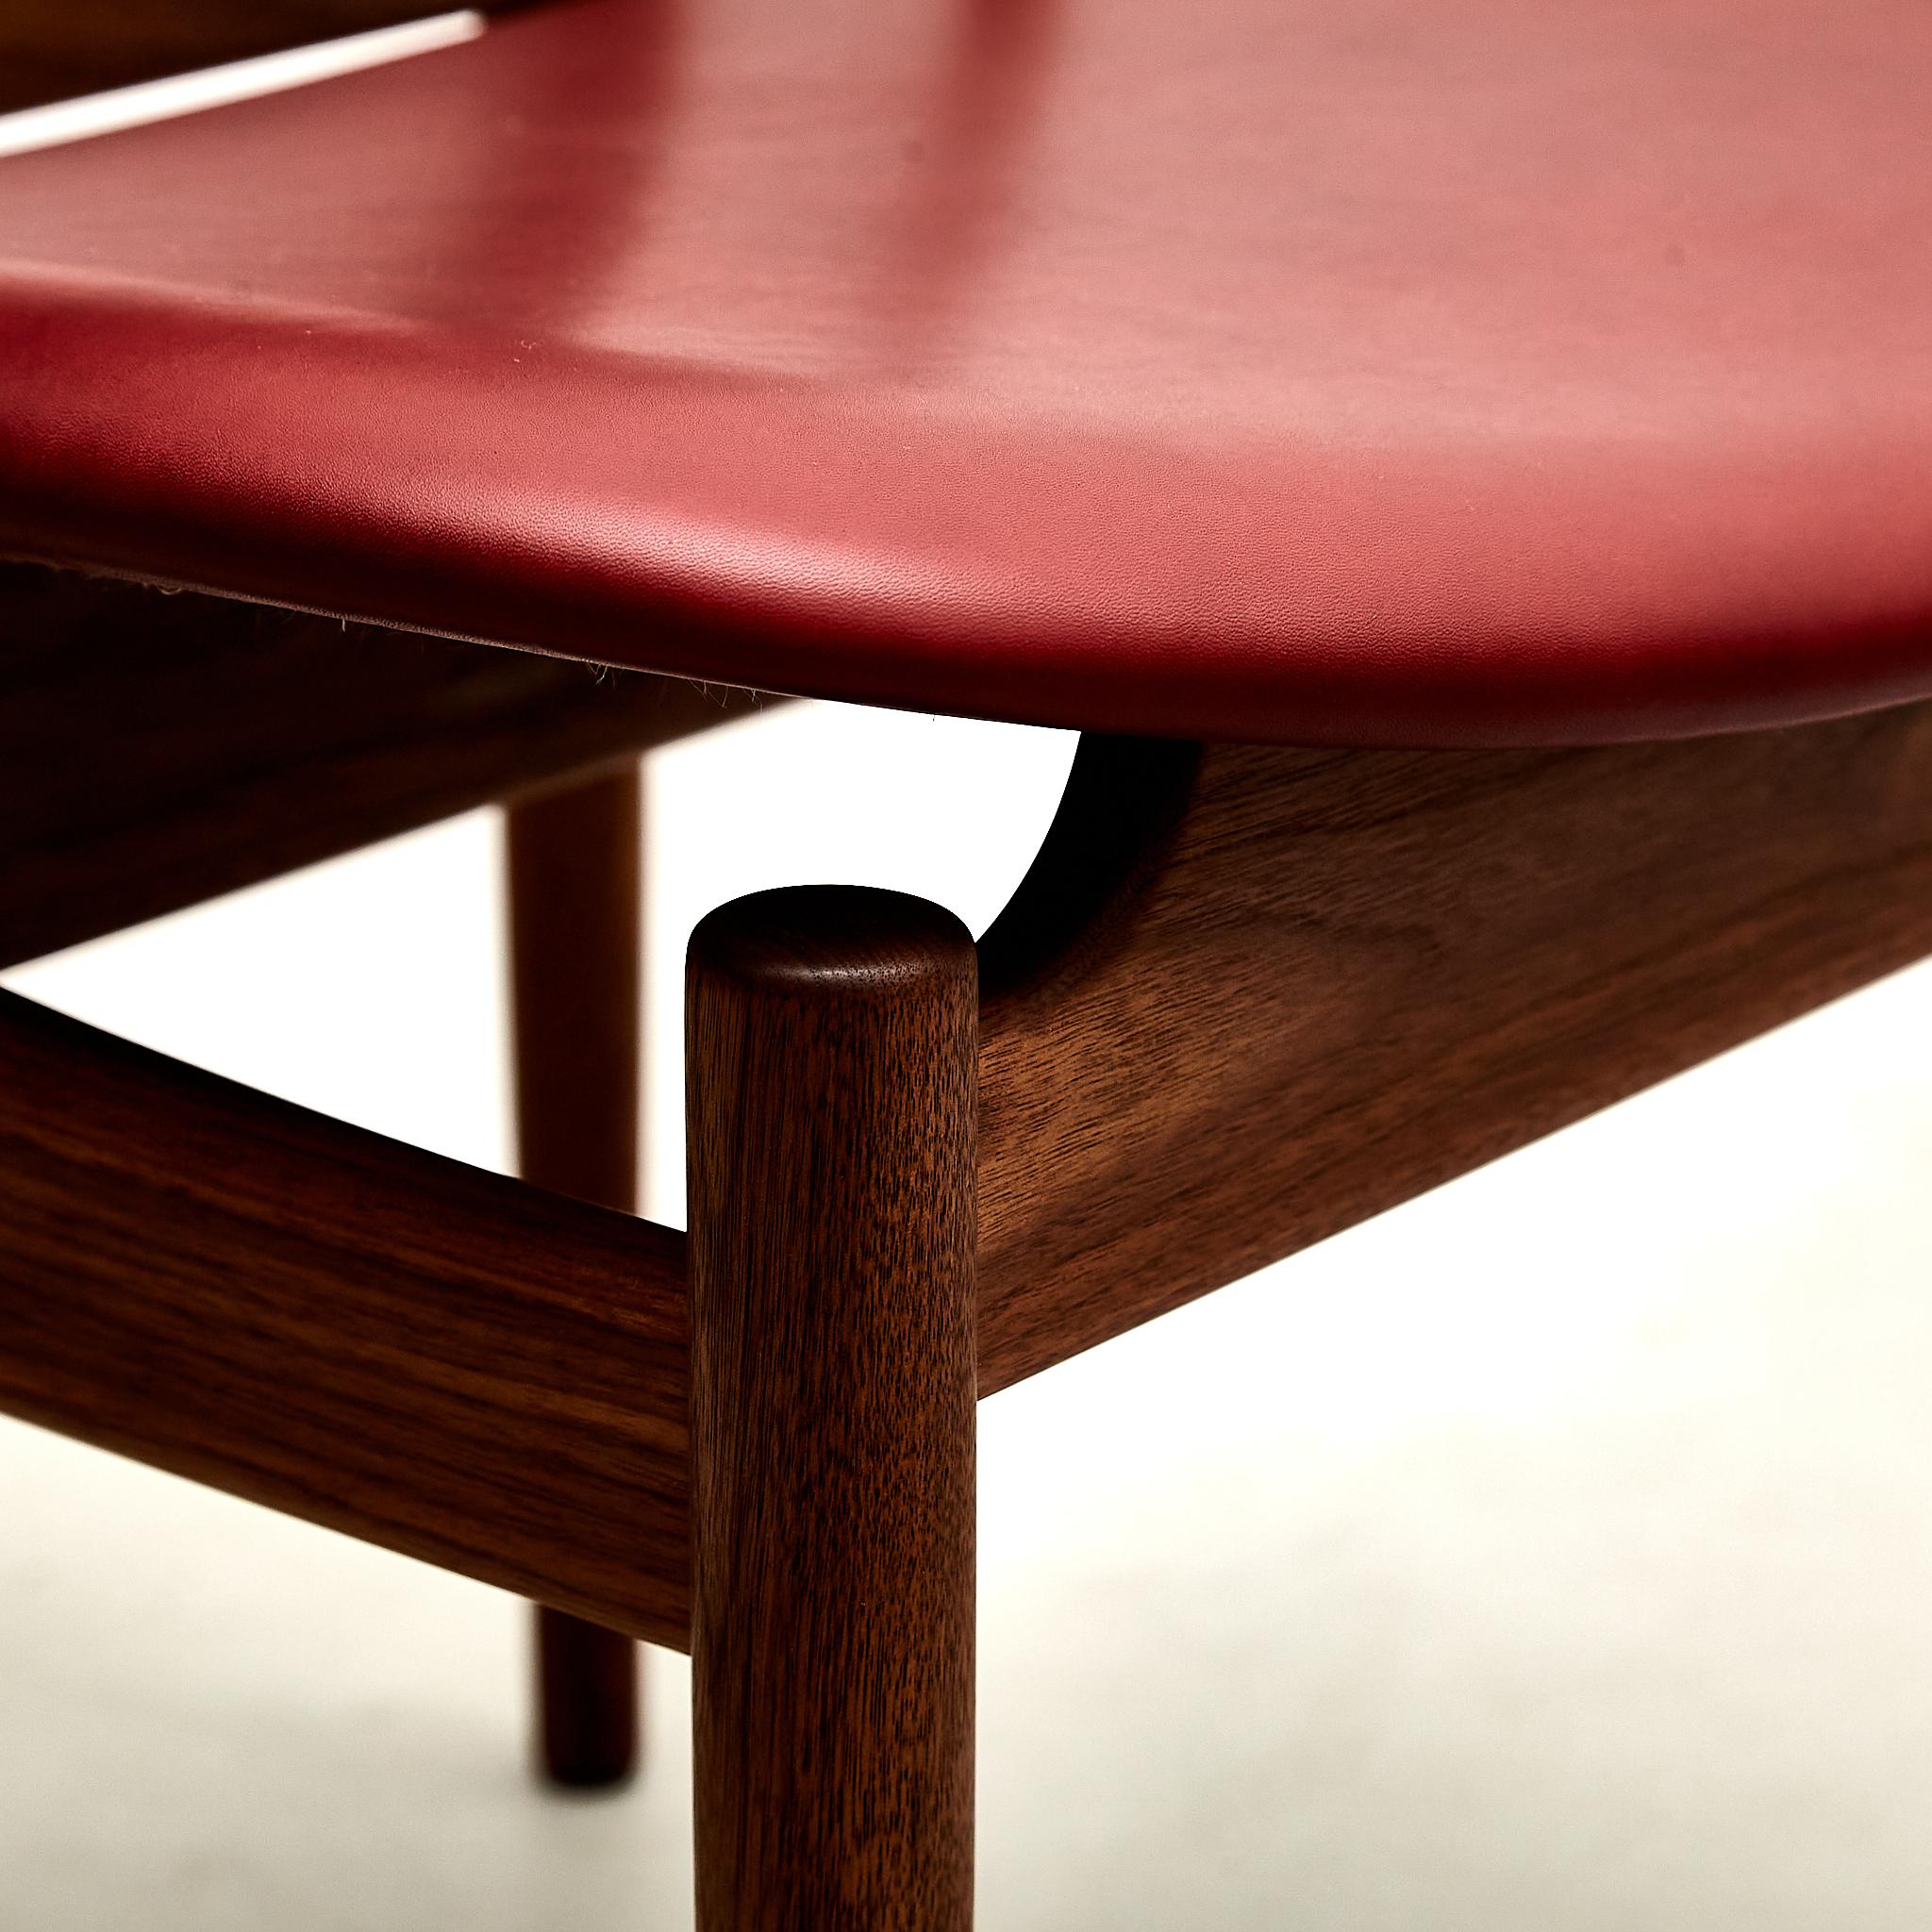 Finn Juhl Egyptian Chair in Walnut Wood and Dark Red Leather For Sale 8